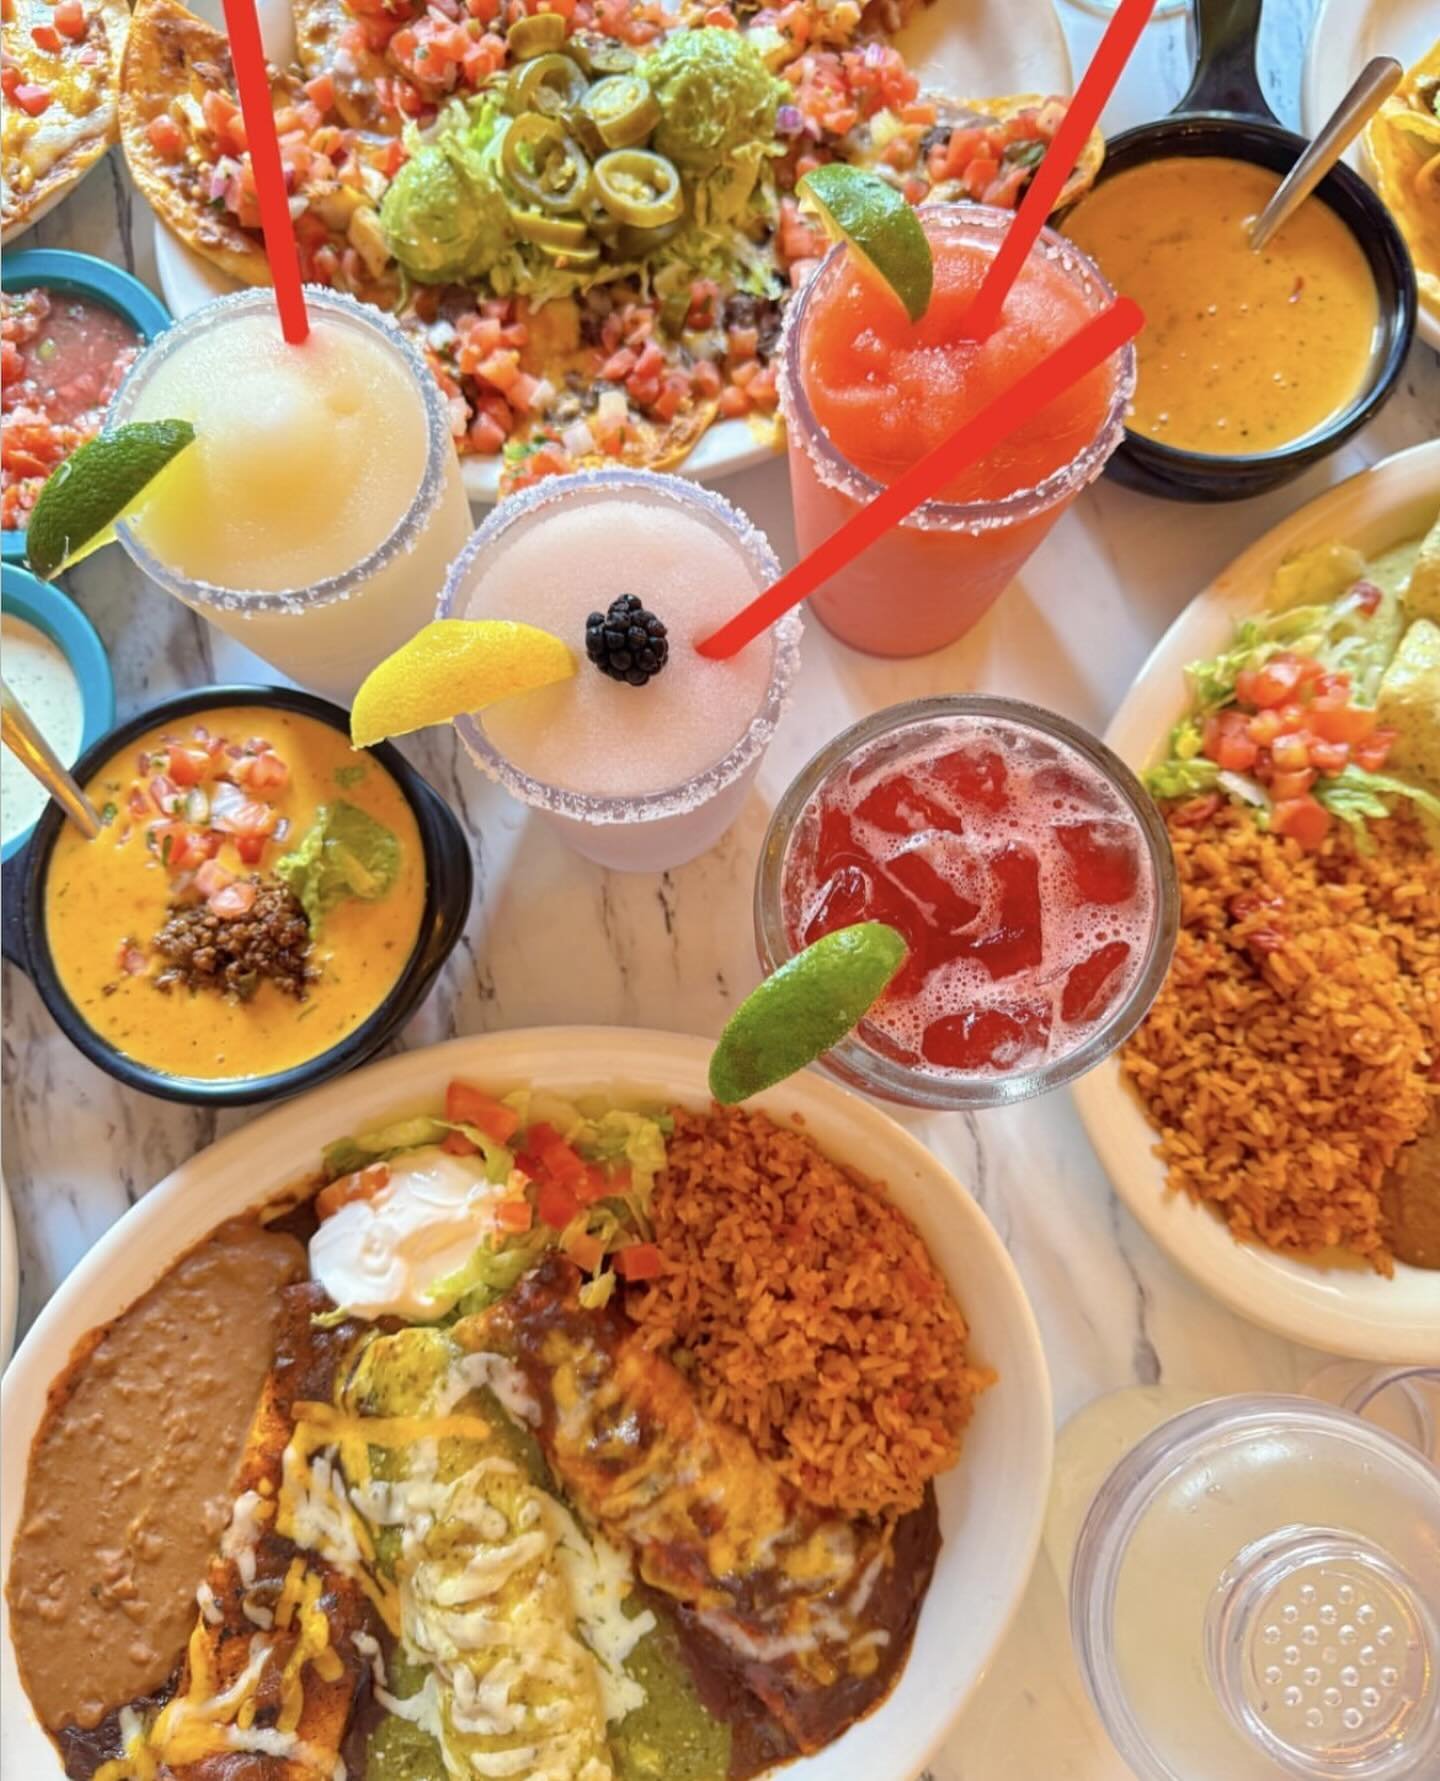 Y&rsquo;all better groove on over to @chuysrestaurant for Cinco de Mayo! Can&rsquo;t beat these all-day specials or these vibes.

🍹 $6 Regular House &lsquo;Ritas &amp; $10 Grande House &lsquo;Ritas

🍹 $1 Floaters

🧀 $5 Queso and more

🌮🌯 NEW Chu